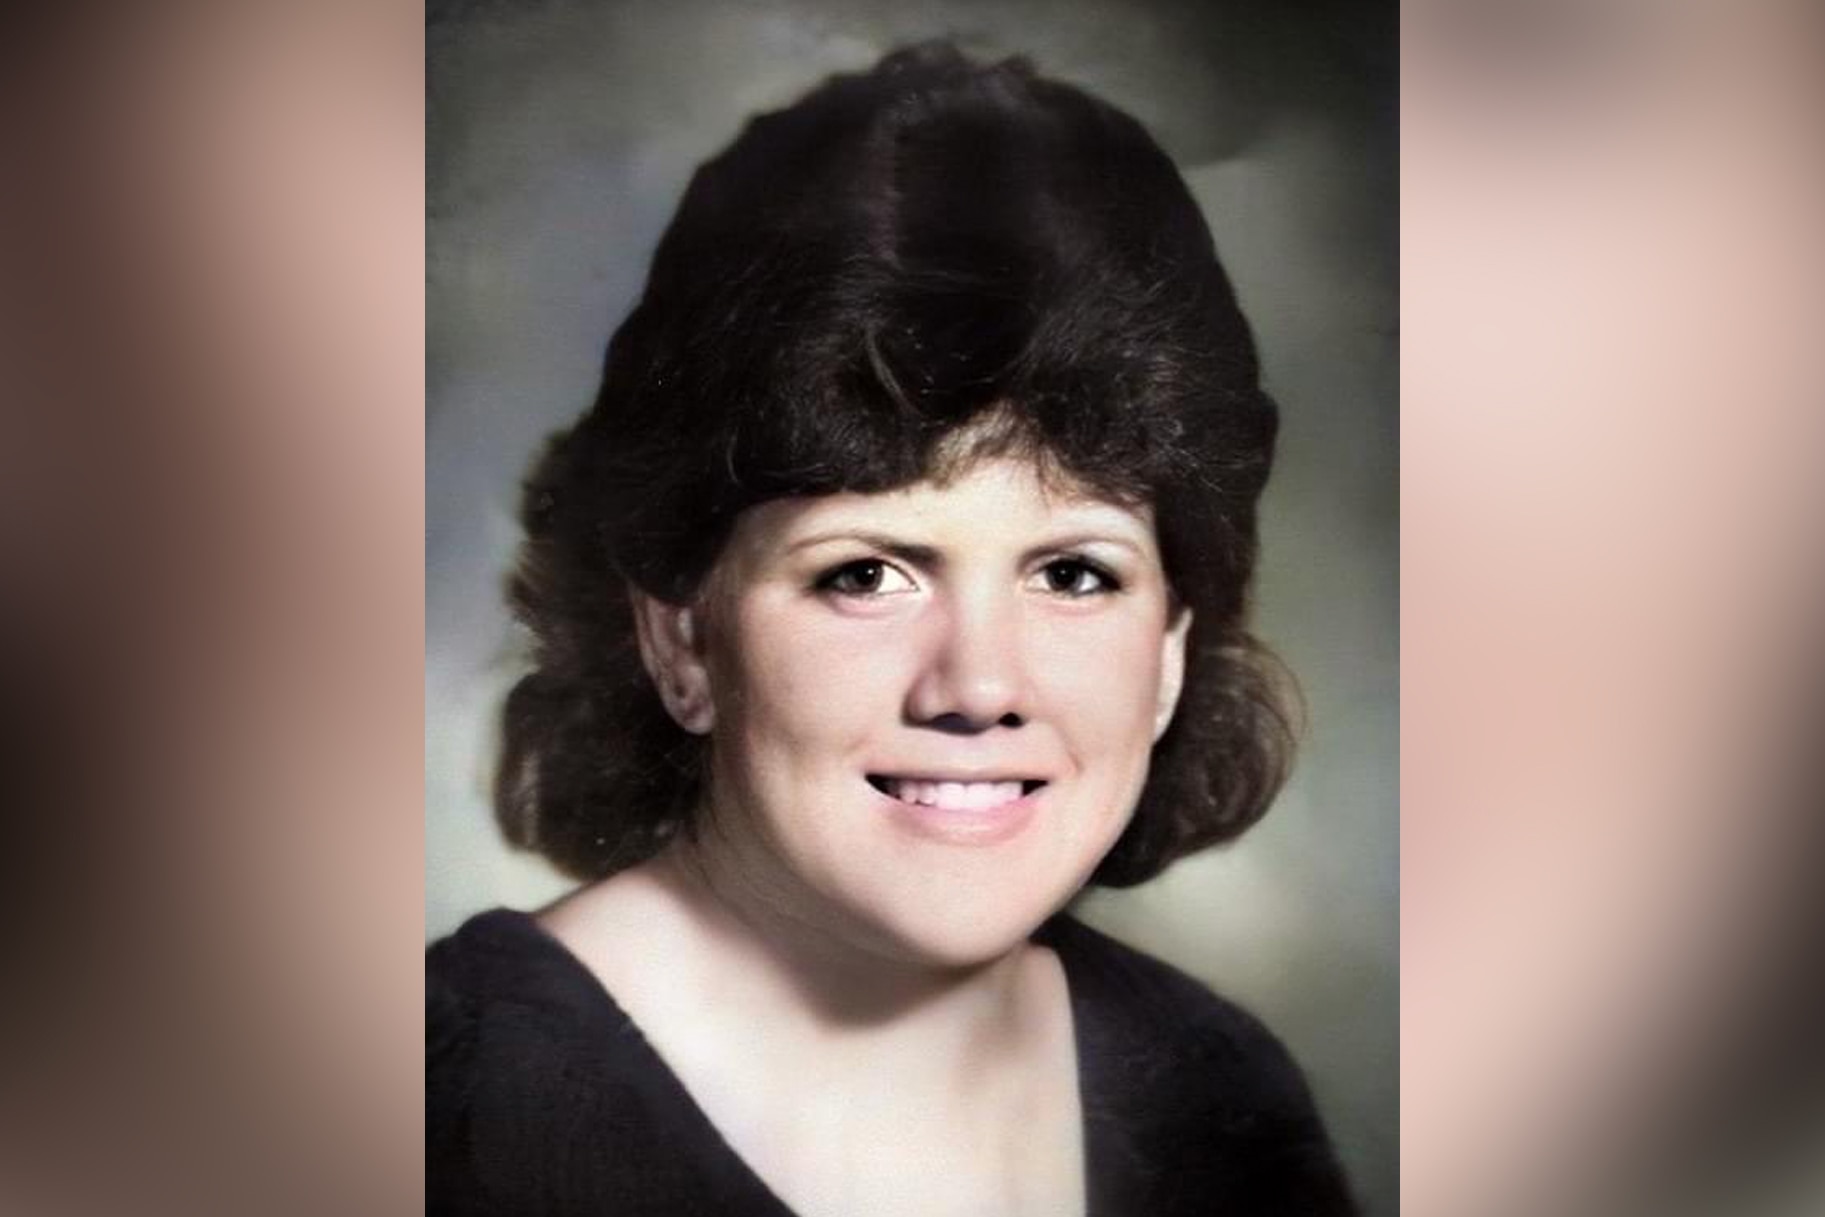 A police handout of cold case victim Stacey Lyn Chahorski